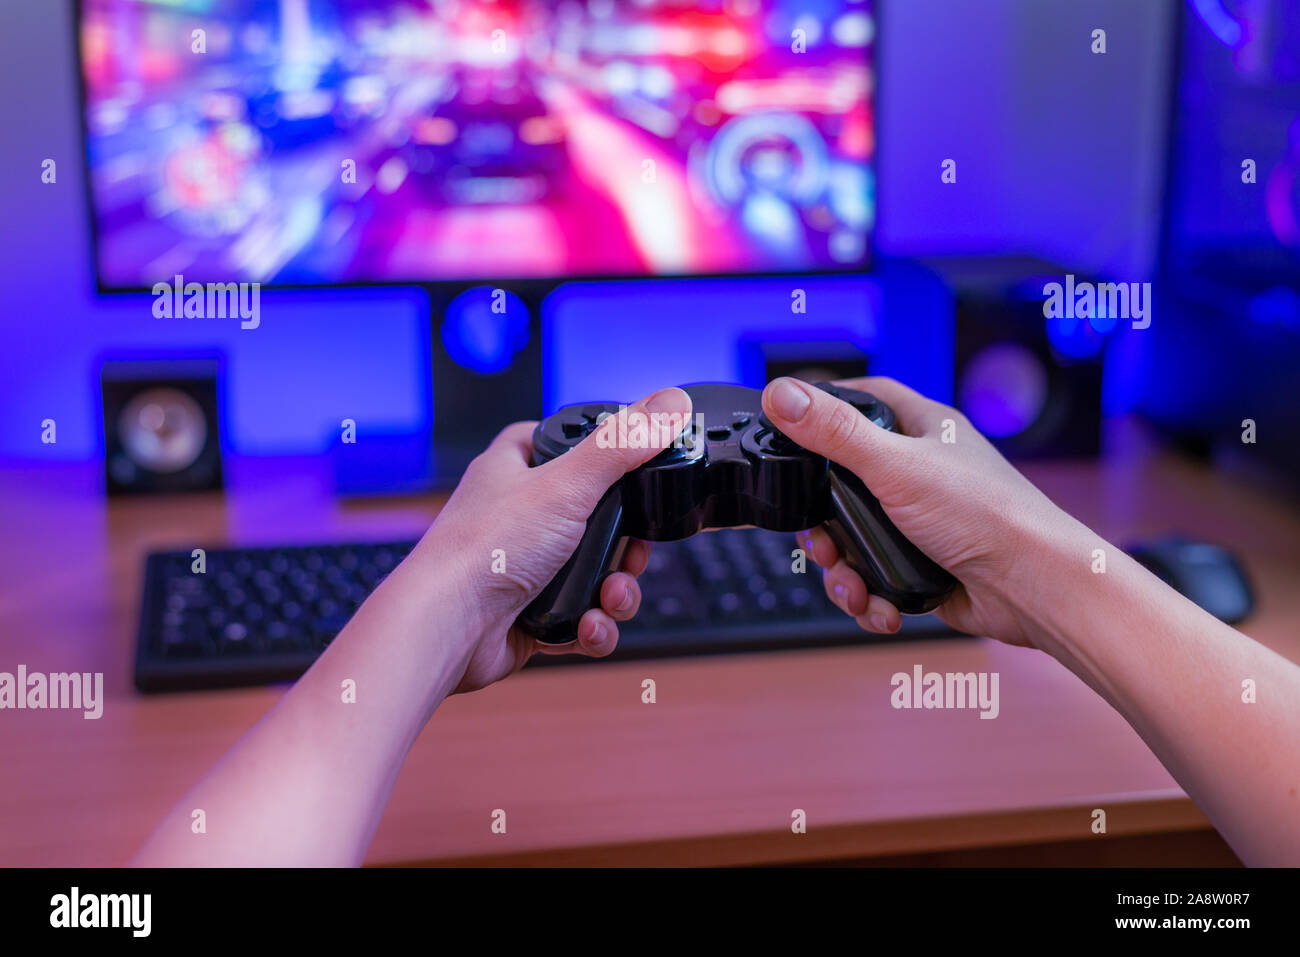 Gaming on a computer with a joypad. Game concept on computer display with RGB light. View from first person. Stock Photo